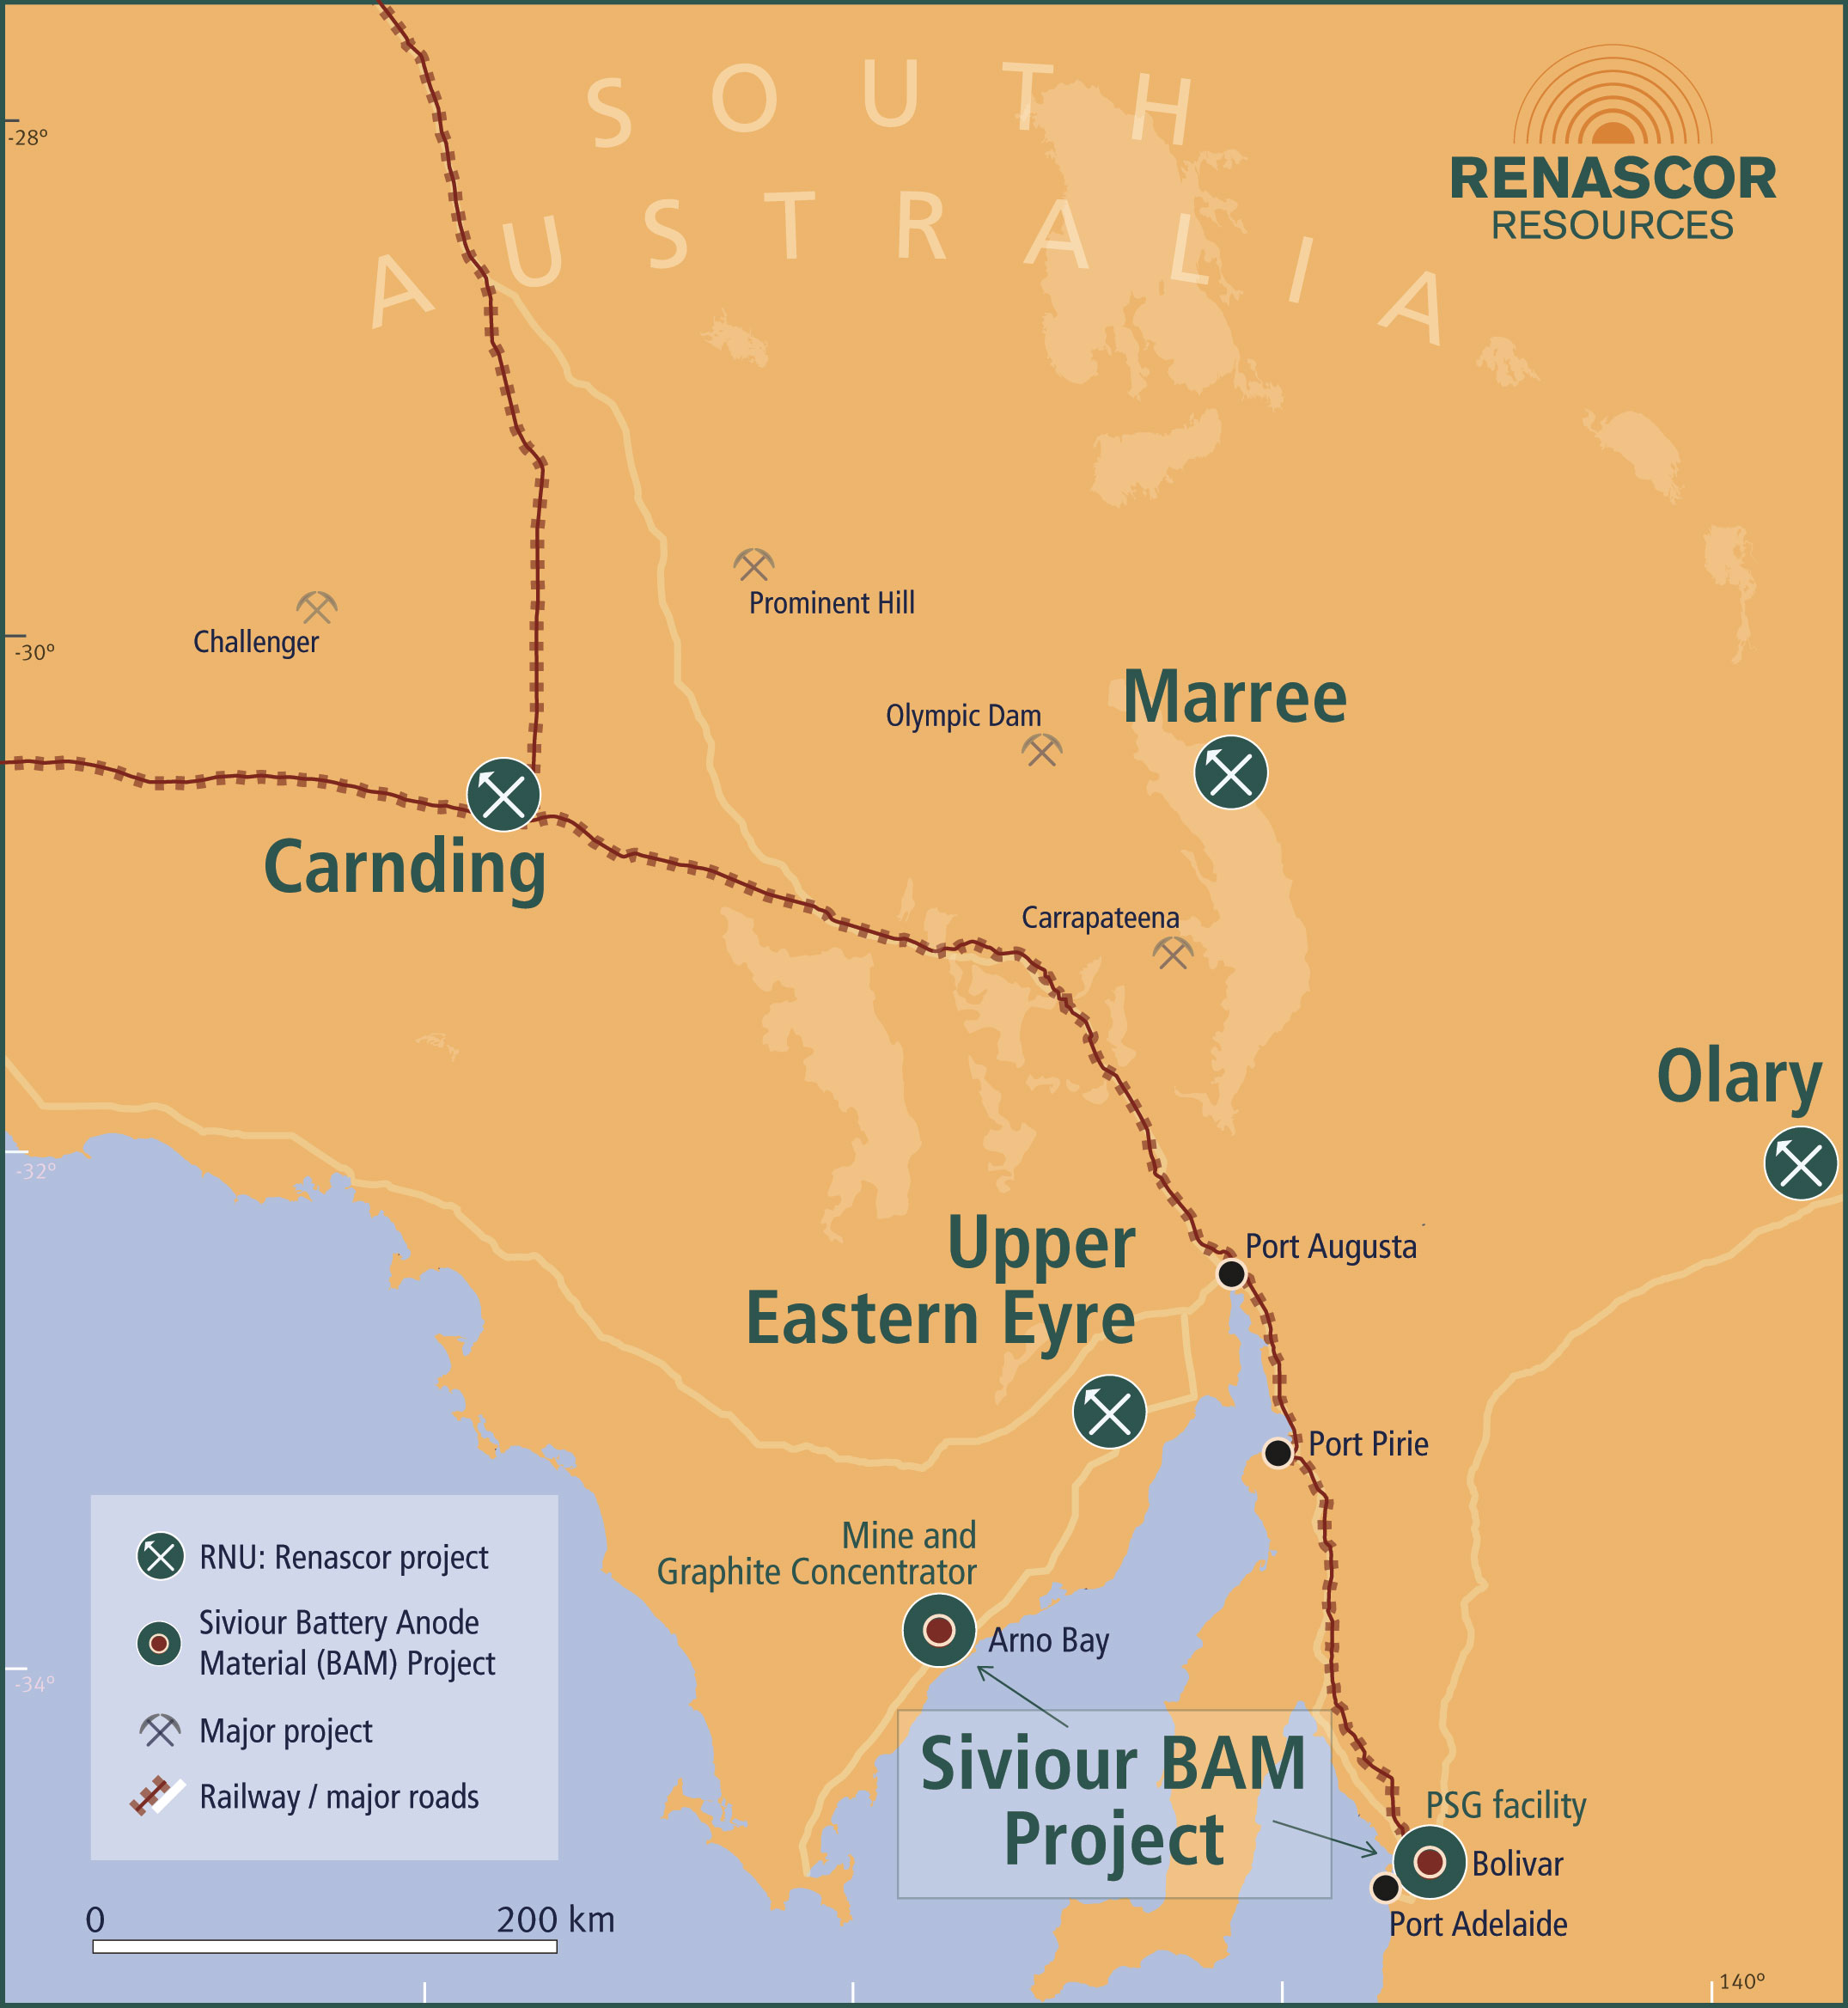 Images showing the 6 locations of Renascor Resource's projects in the state of South Australia